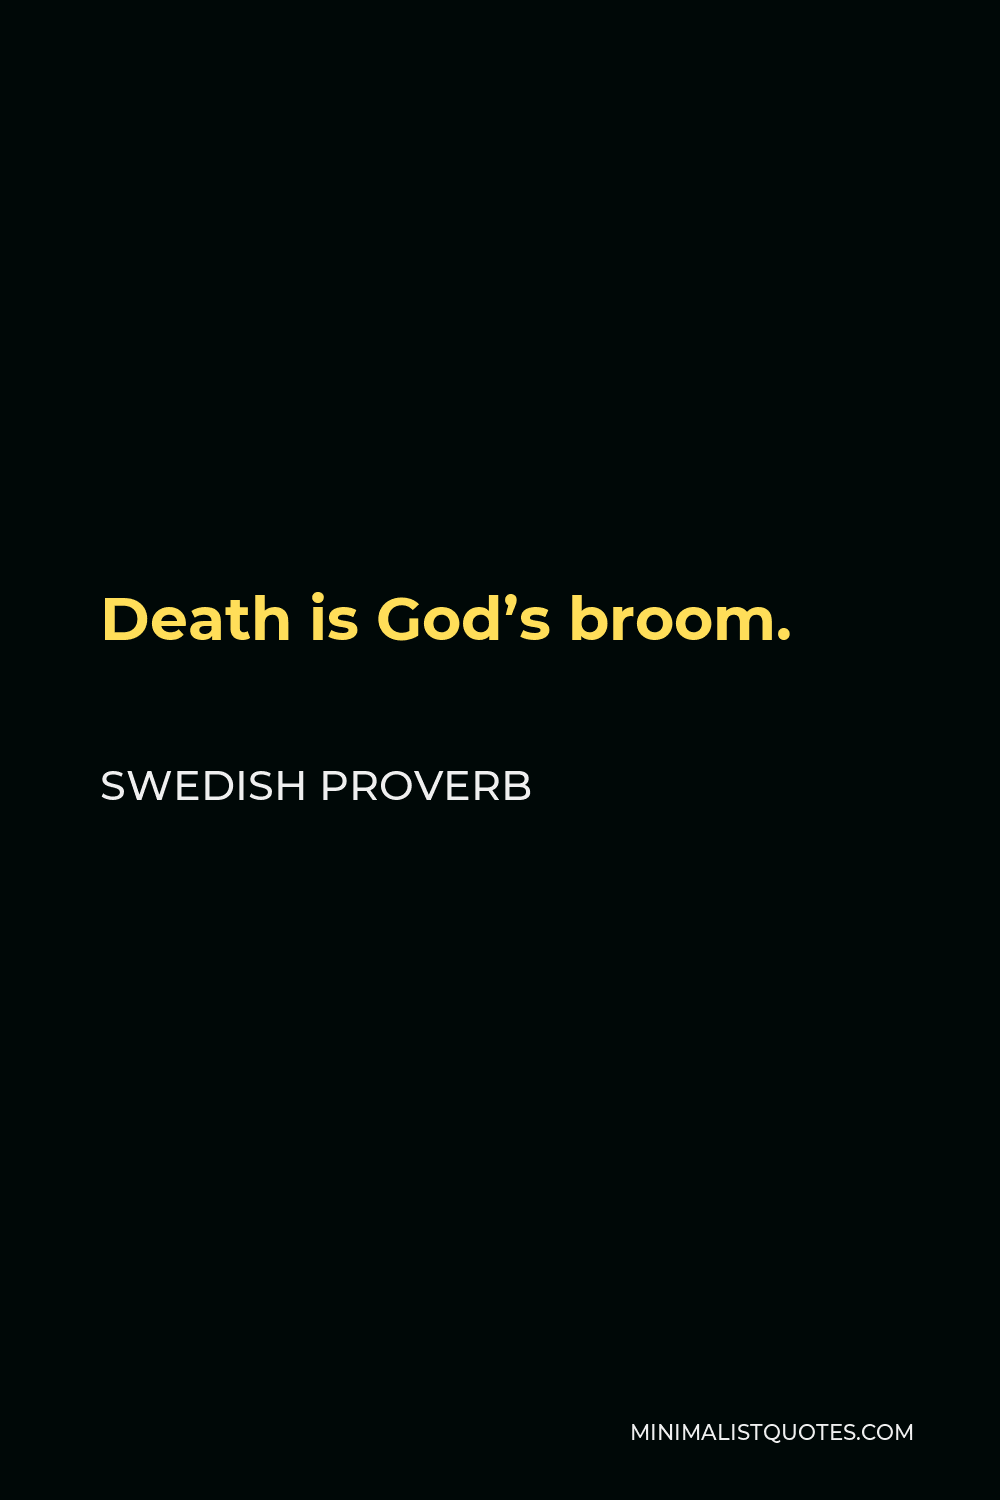 Swedish Proverb Quote - Death is God’s broom.